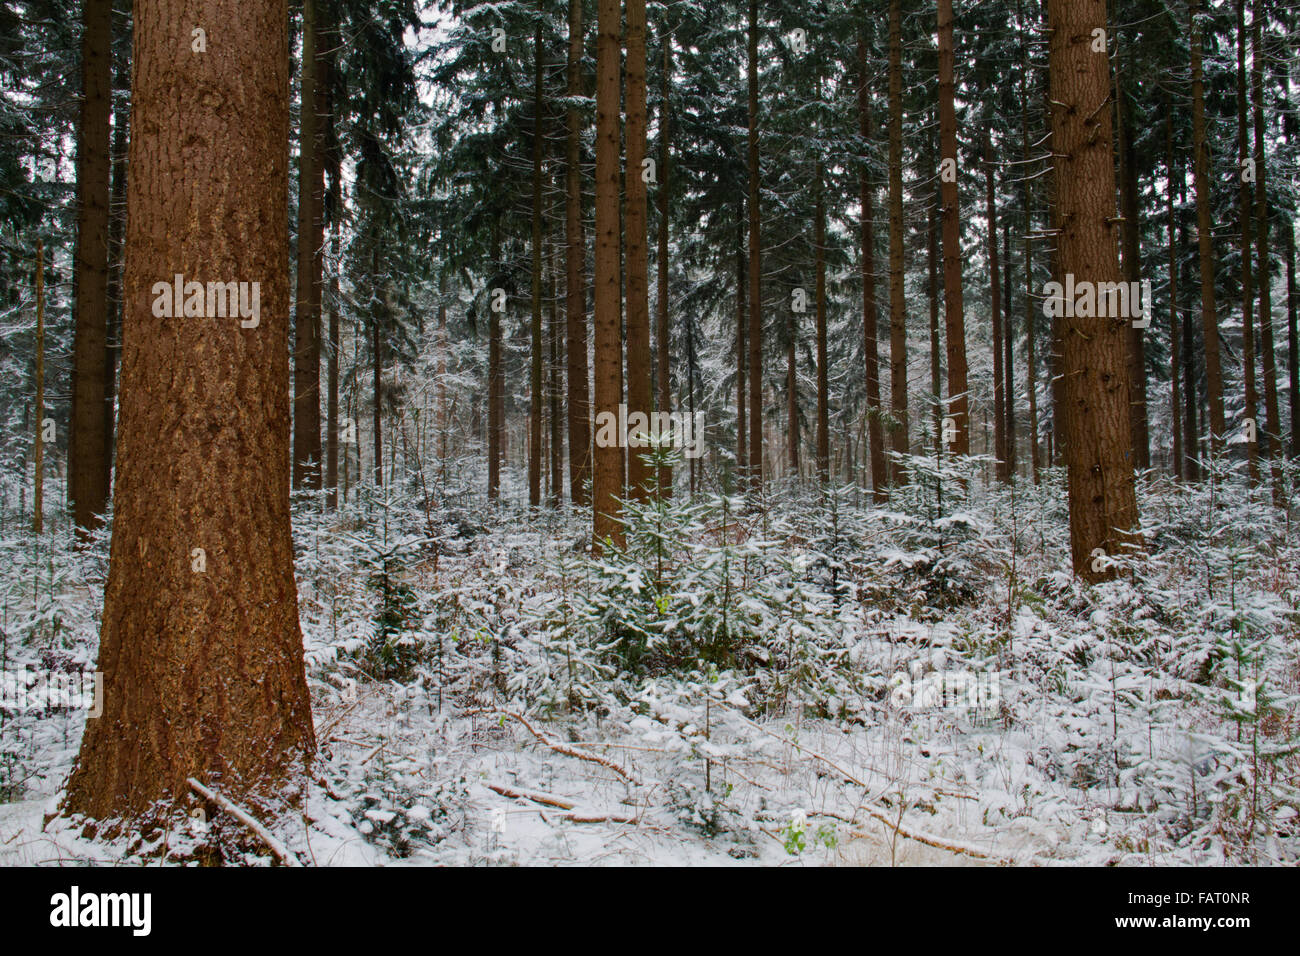 A forest of tall Douglas fir and seedlings in winter Stock Photo